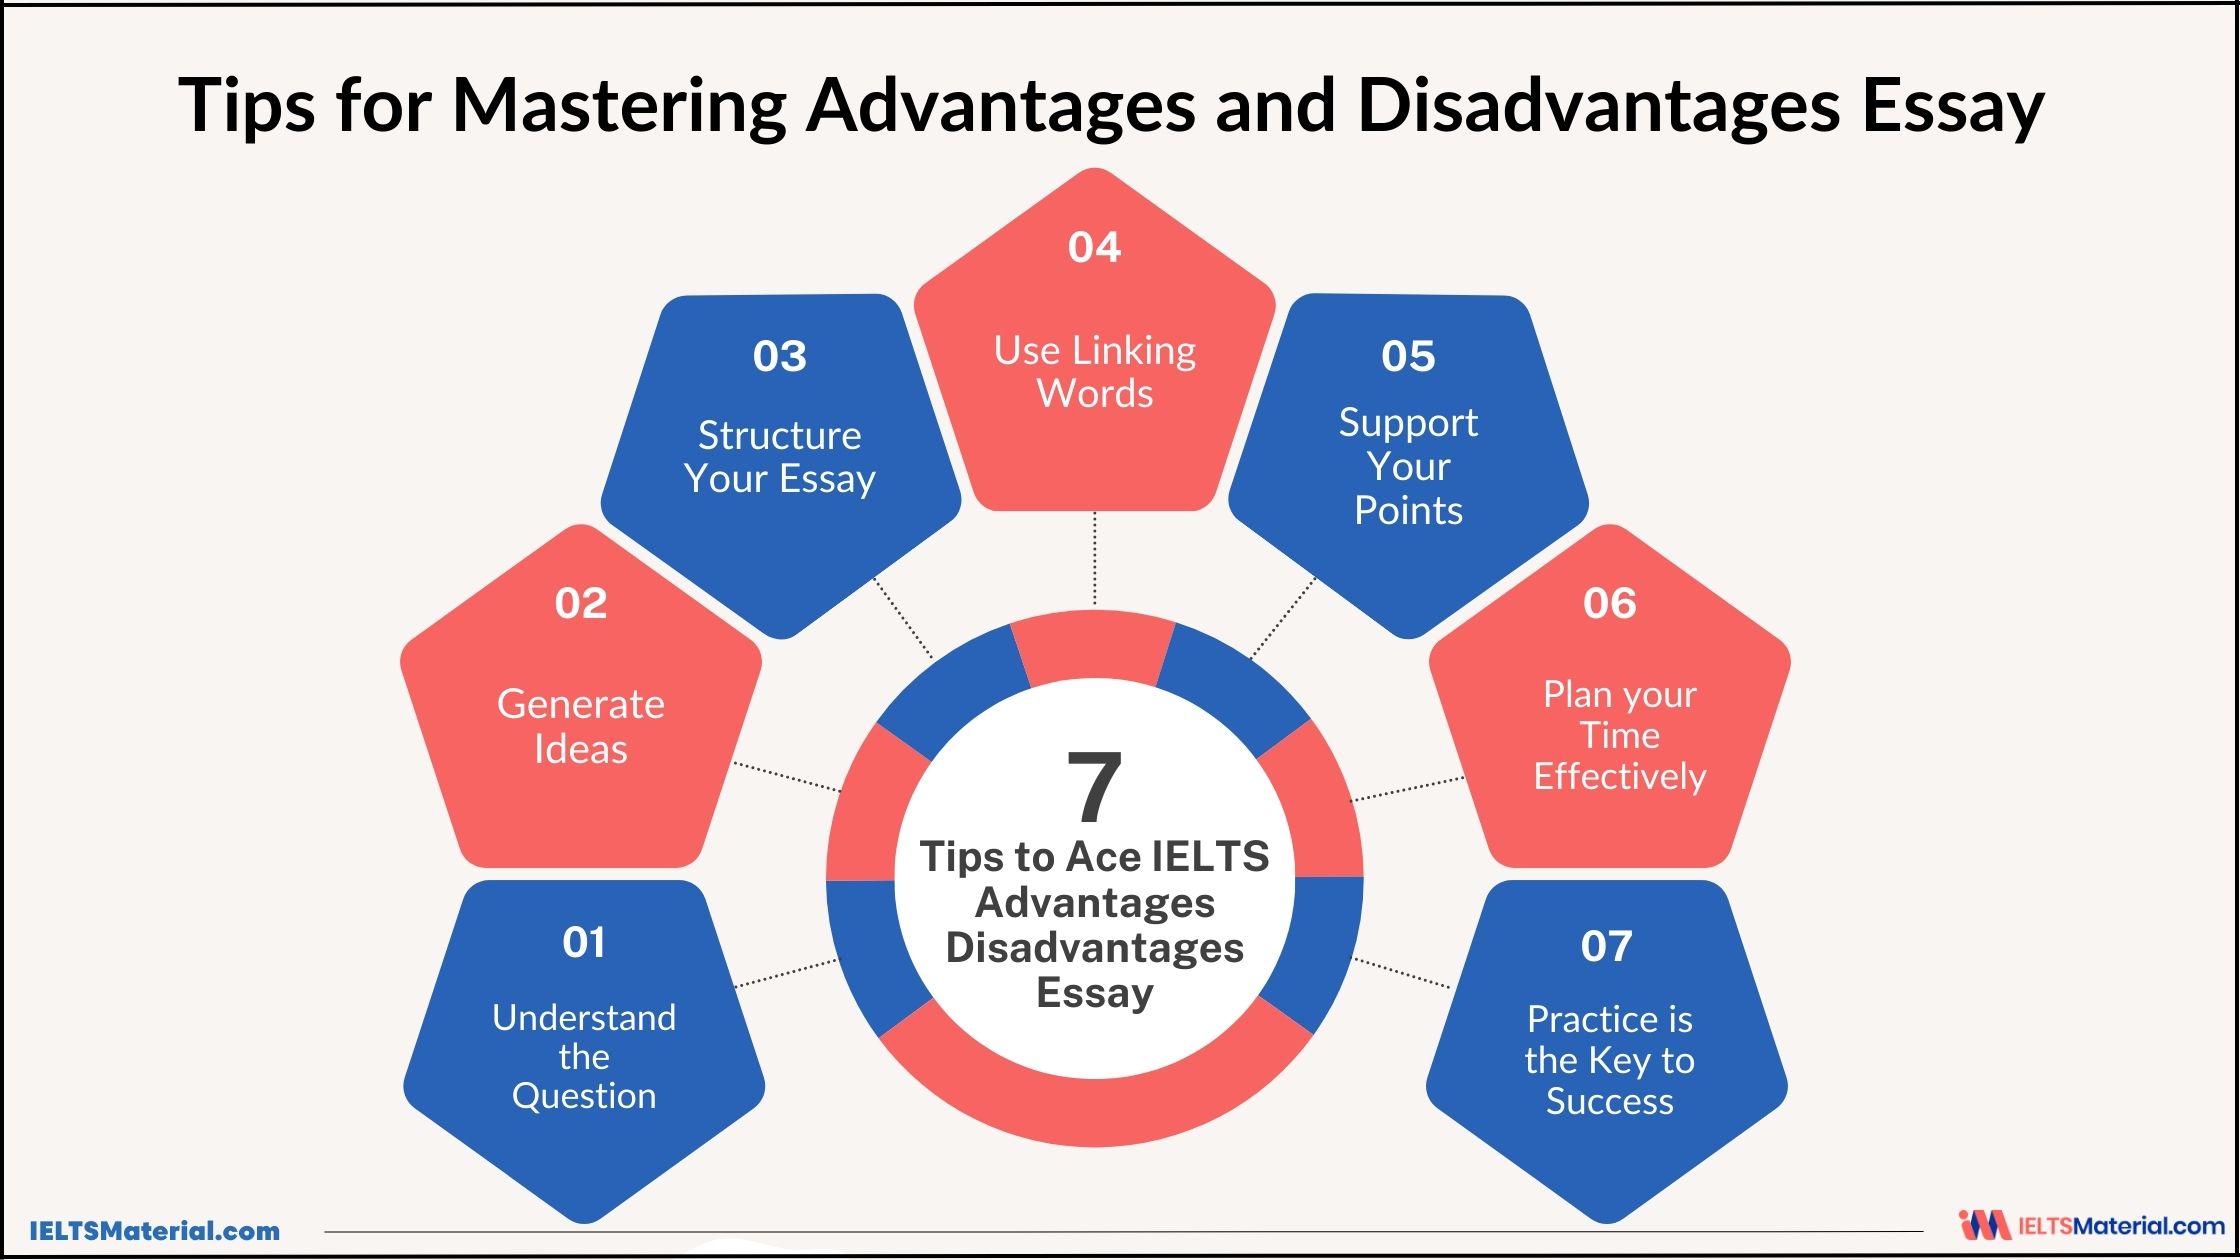 Tips for Mastering Advantages and Disadvantages Essay for IELTS